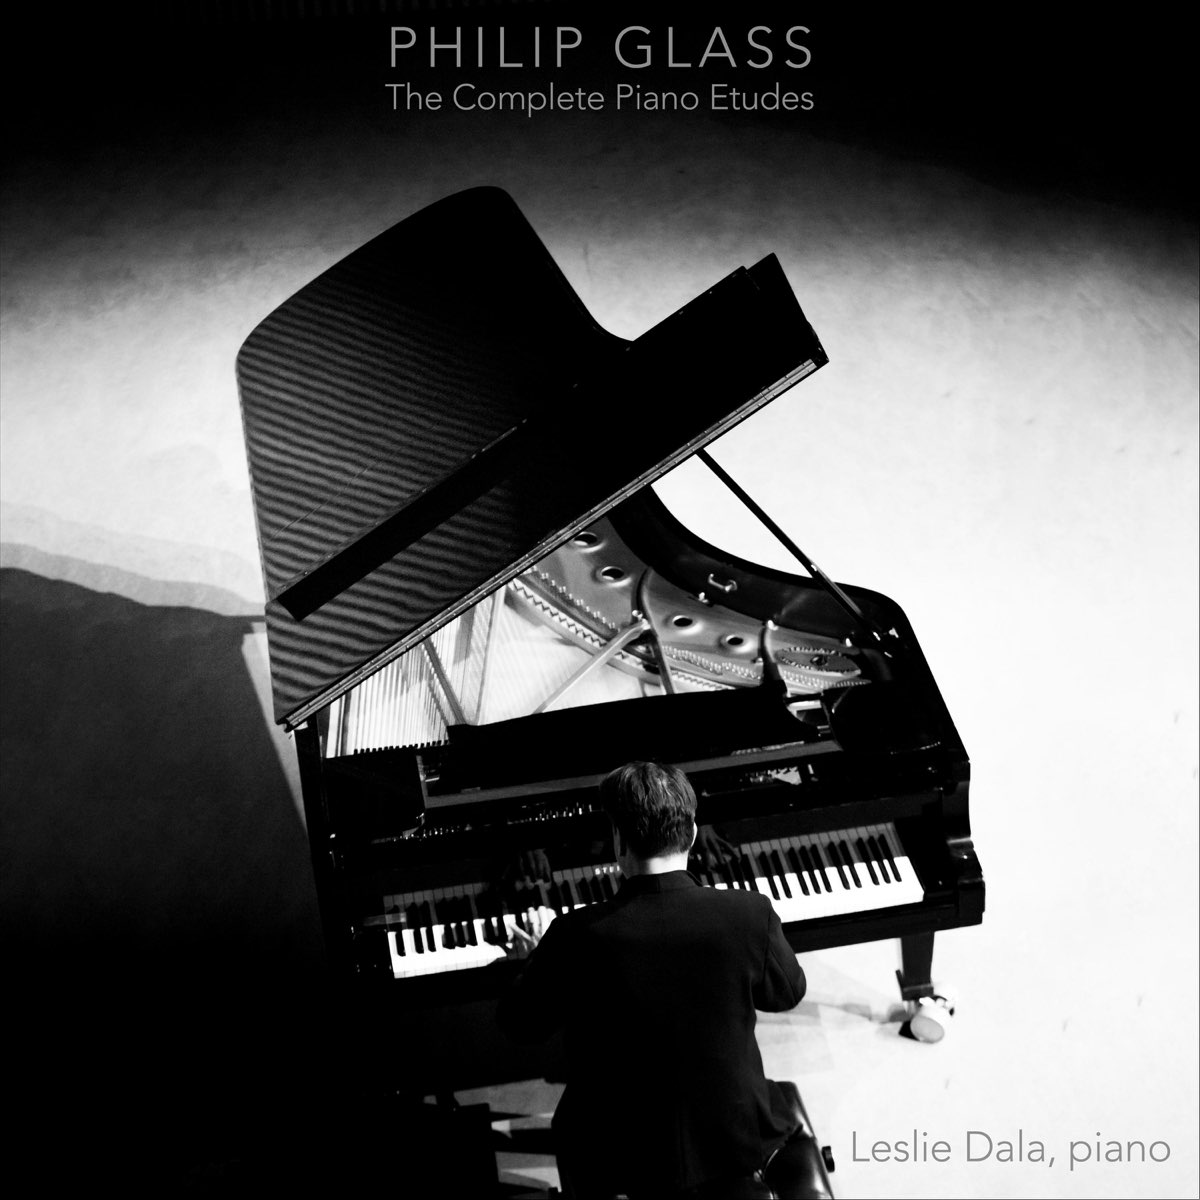 Philip Glass: The Complete Piano Etudes by Leslie Dala on Apple Music